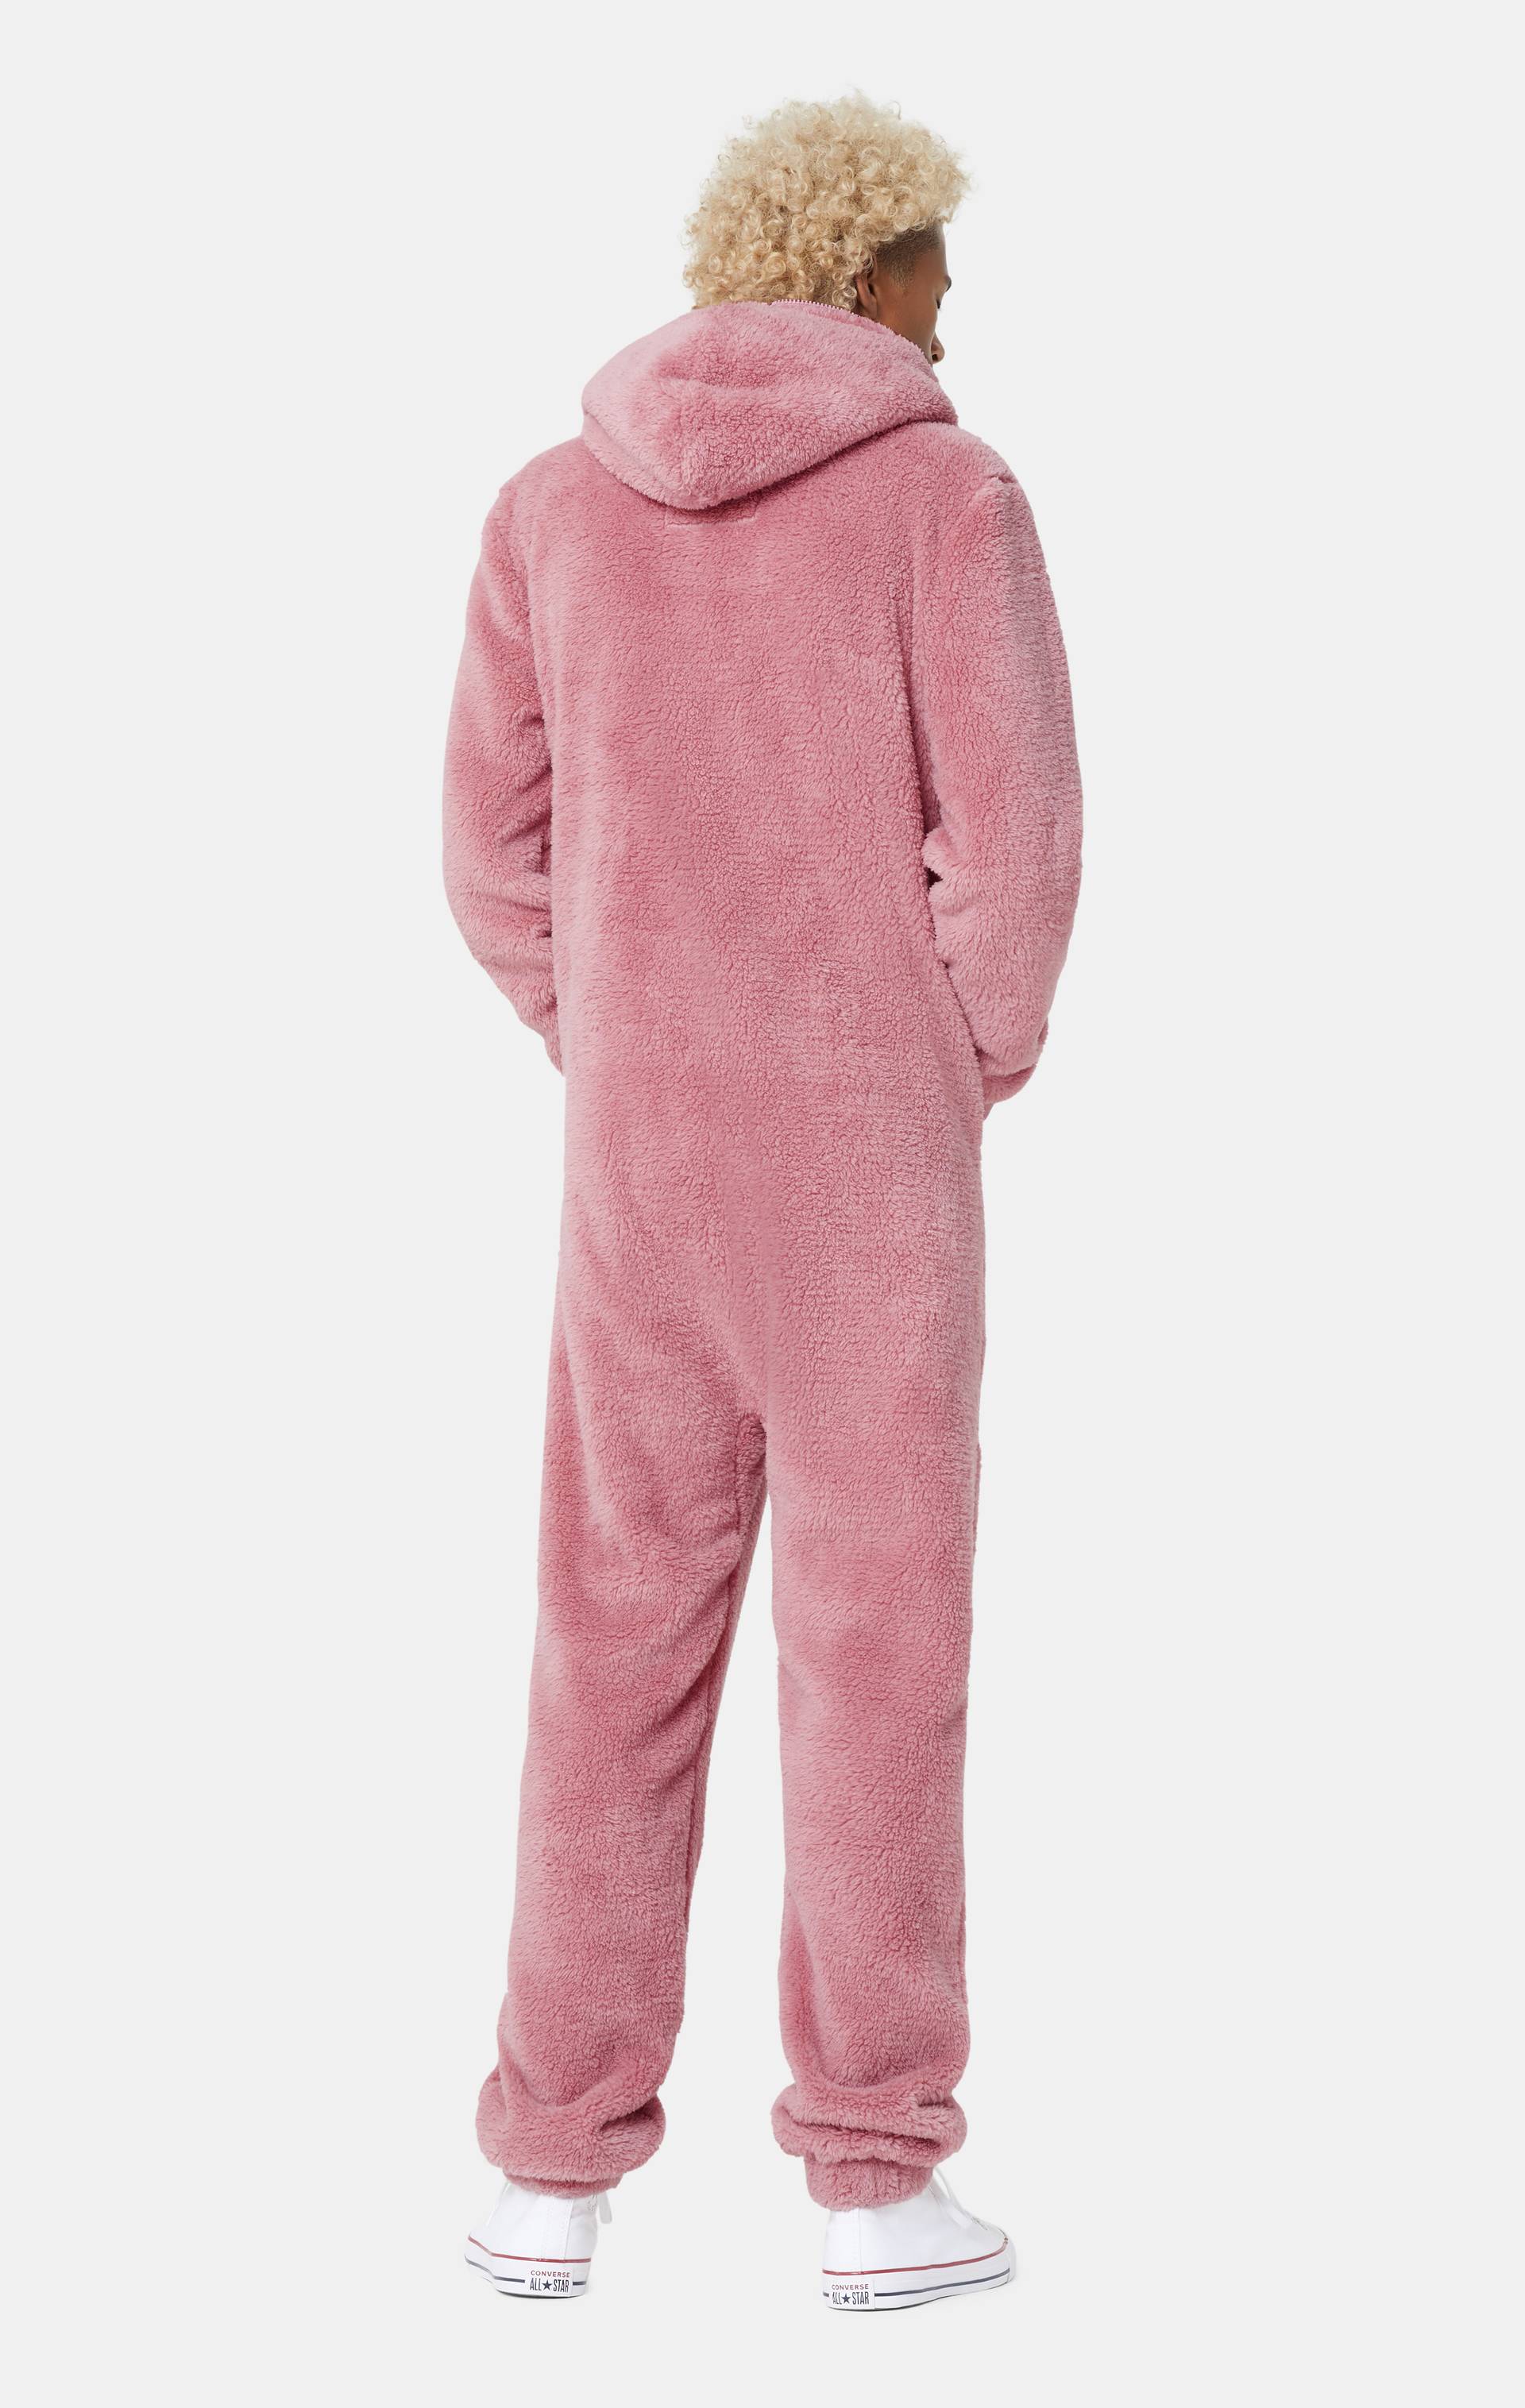 Onepiece The Puppy Jumpsuit Pink - 3